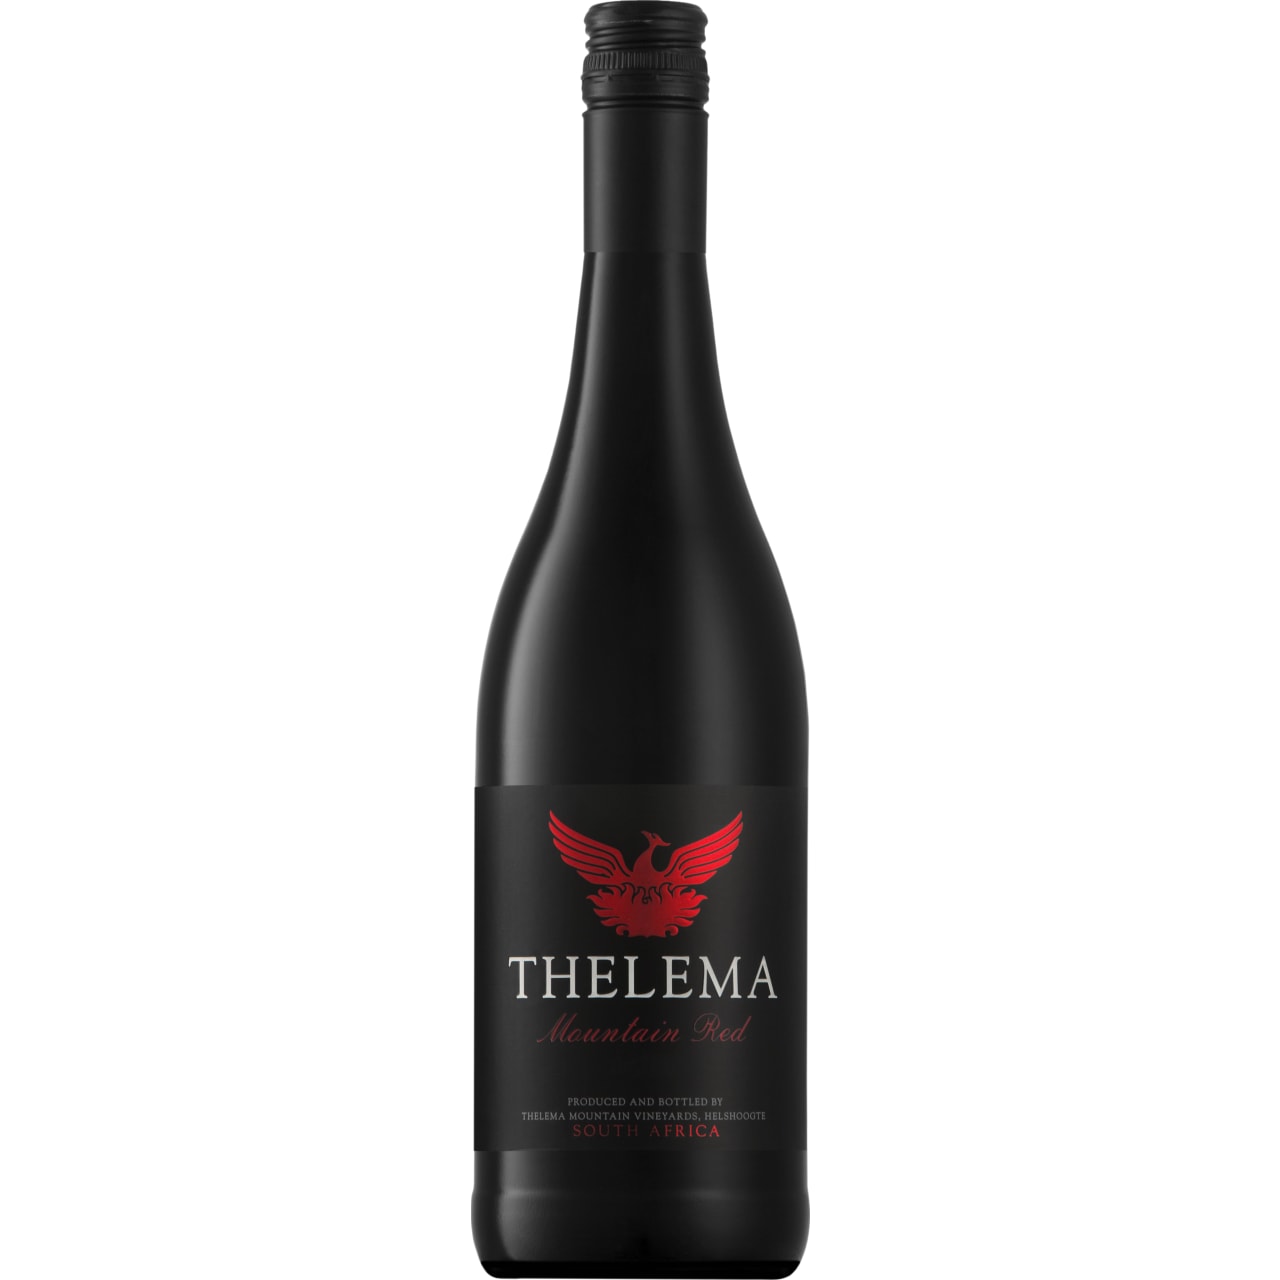 Spicy aromas of black pepper and mulberry mingle with the plum flavours in this soft and approachable wine.